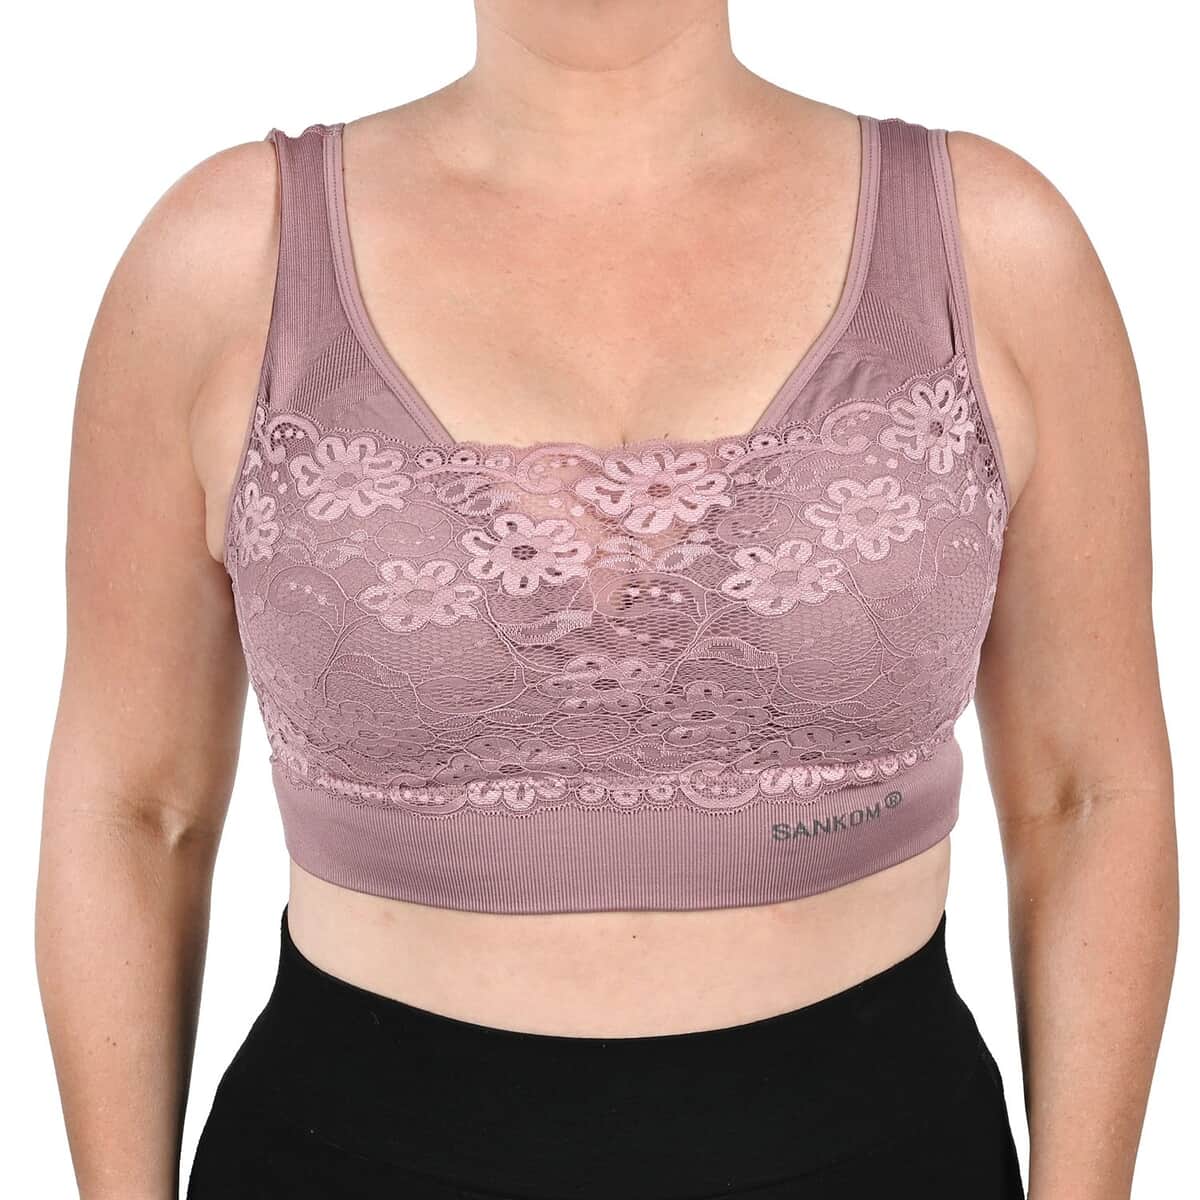 SANKOM Patent Support & Posture Lace Bra with Bamboo Fibers - XXXL | Grey image number 0